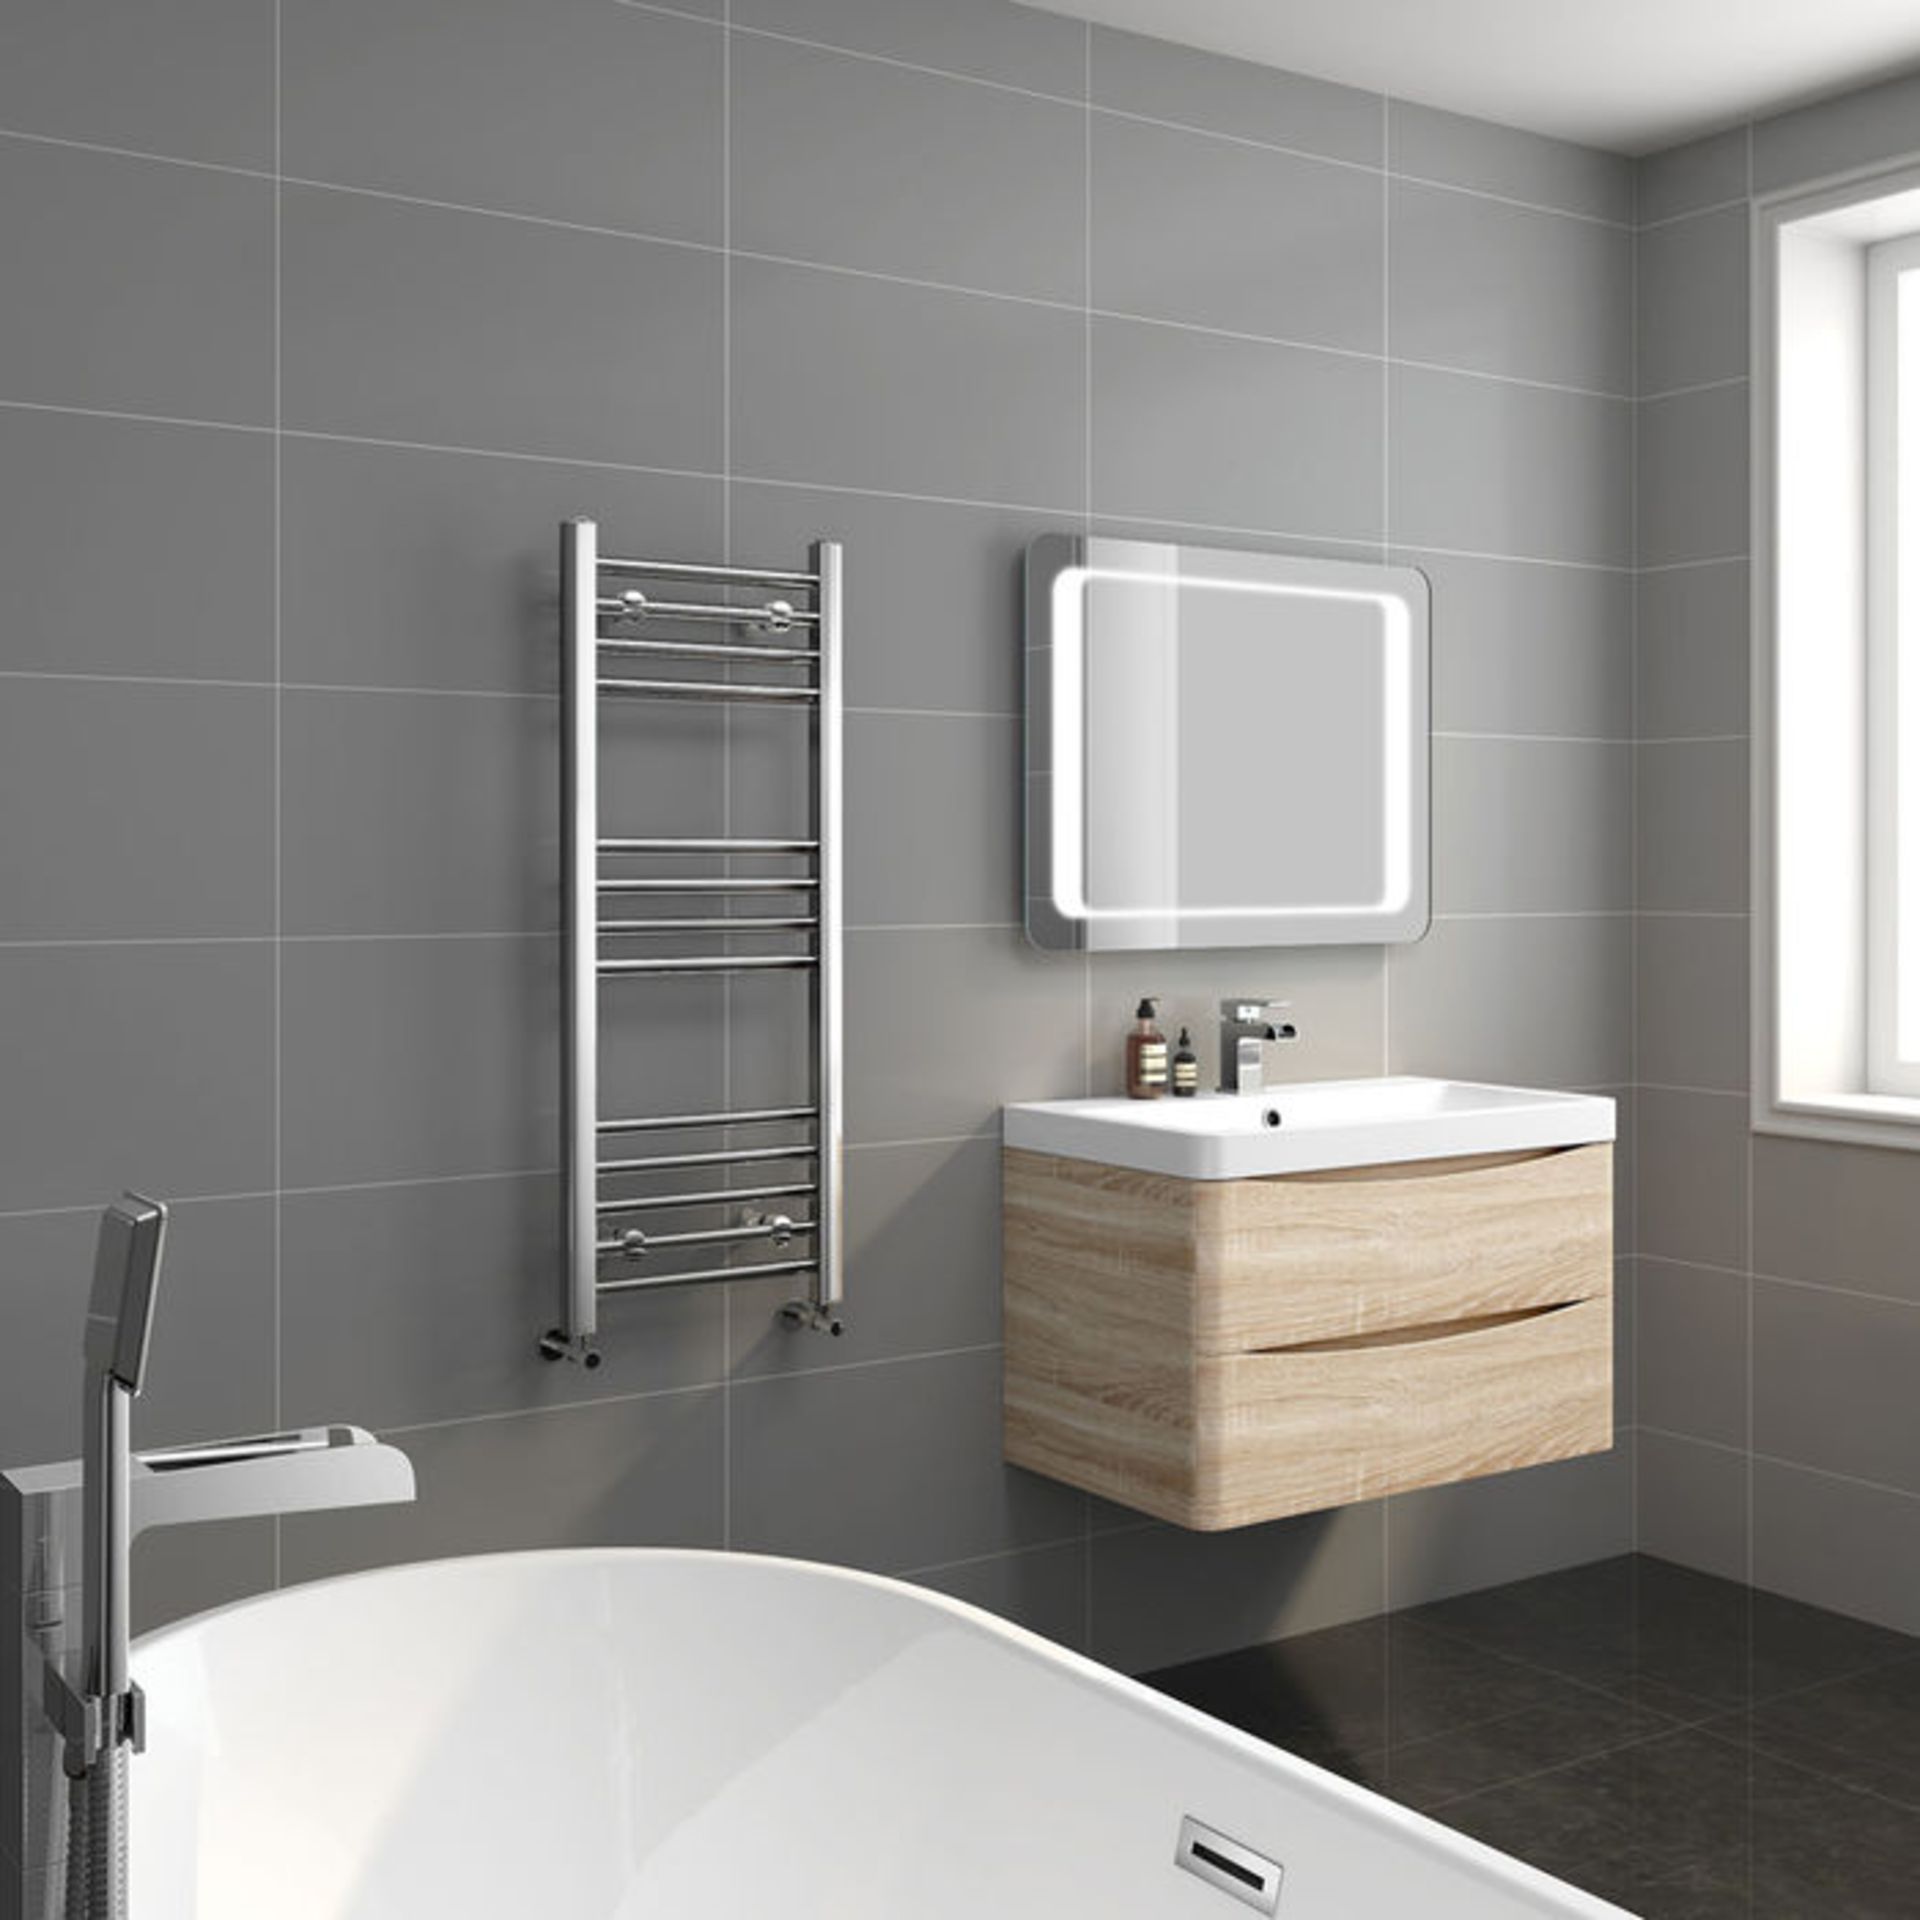 (PT51) 1000x400mm - 20mm Tubes - Chrome Heated Straight Rail Ladder Towel Radiator. Made from chrome - Image 2 of 3